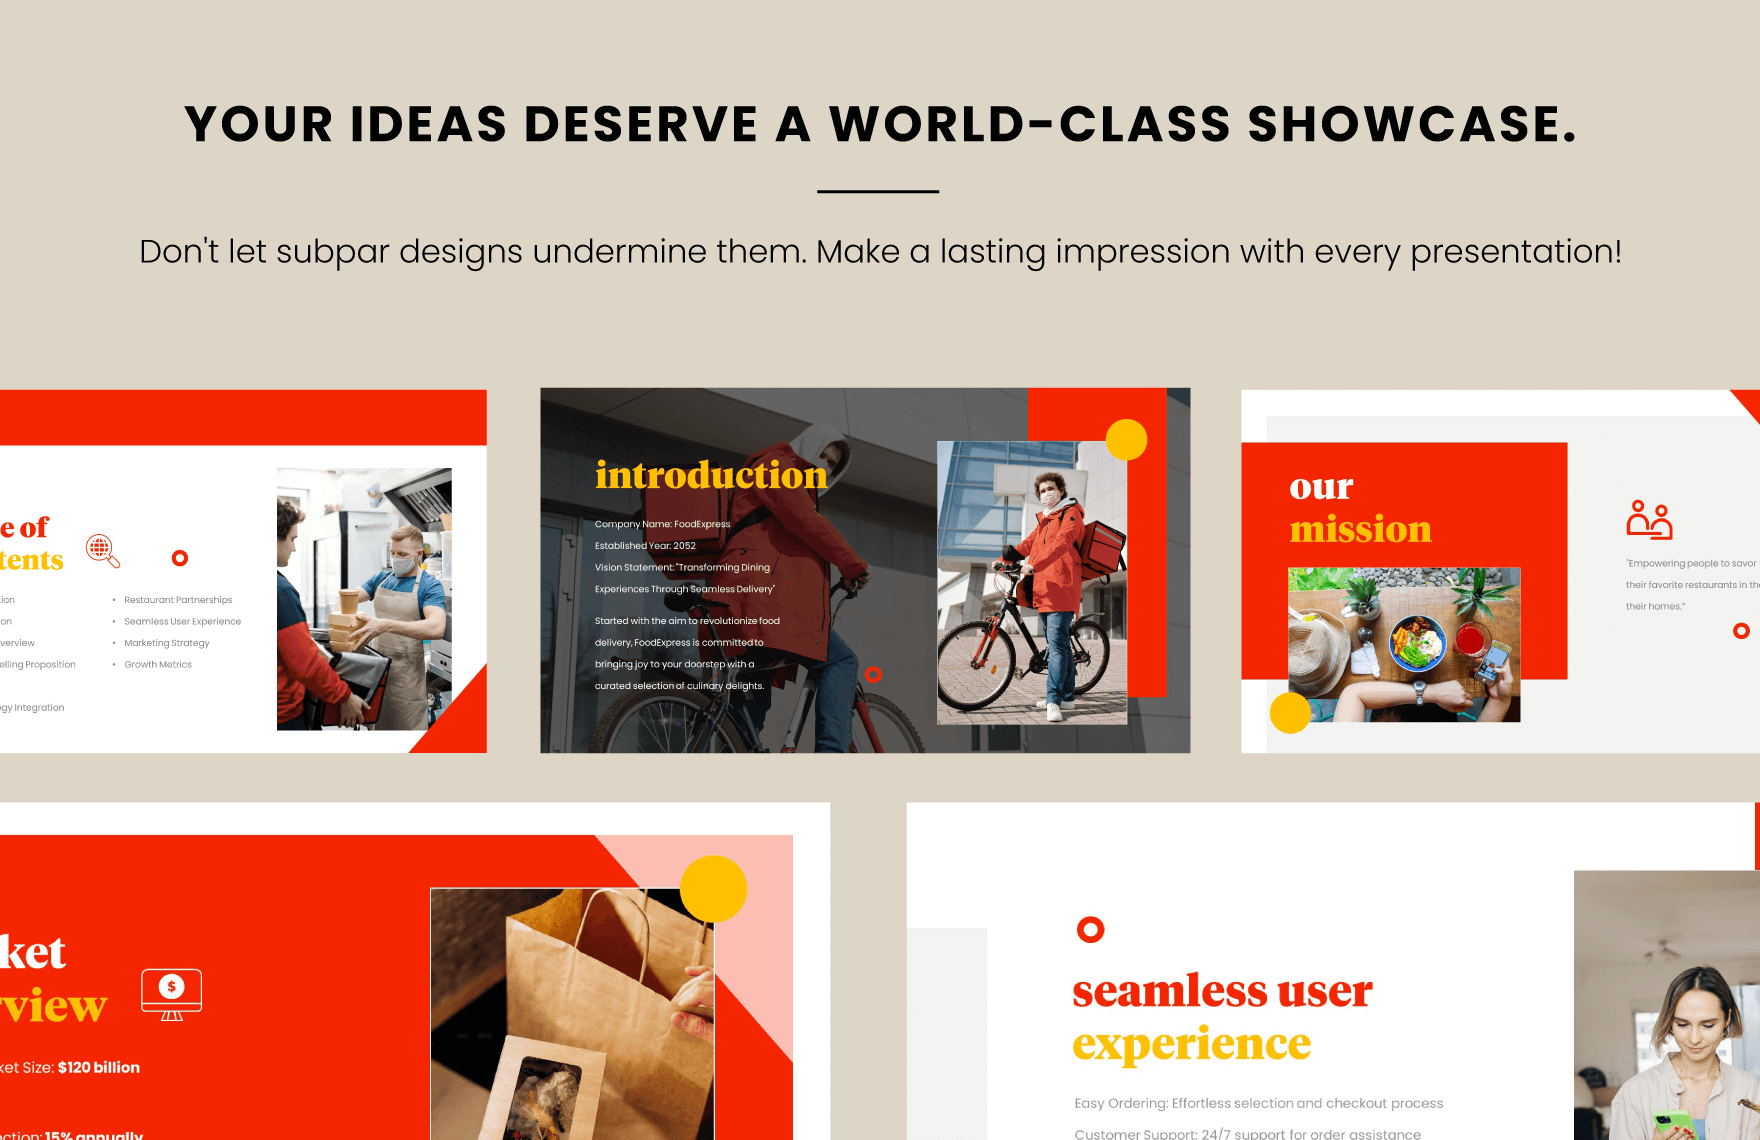 Food Delivery Template